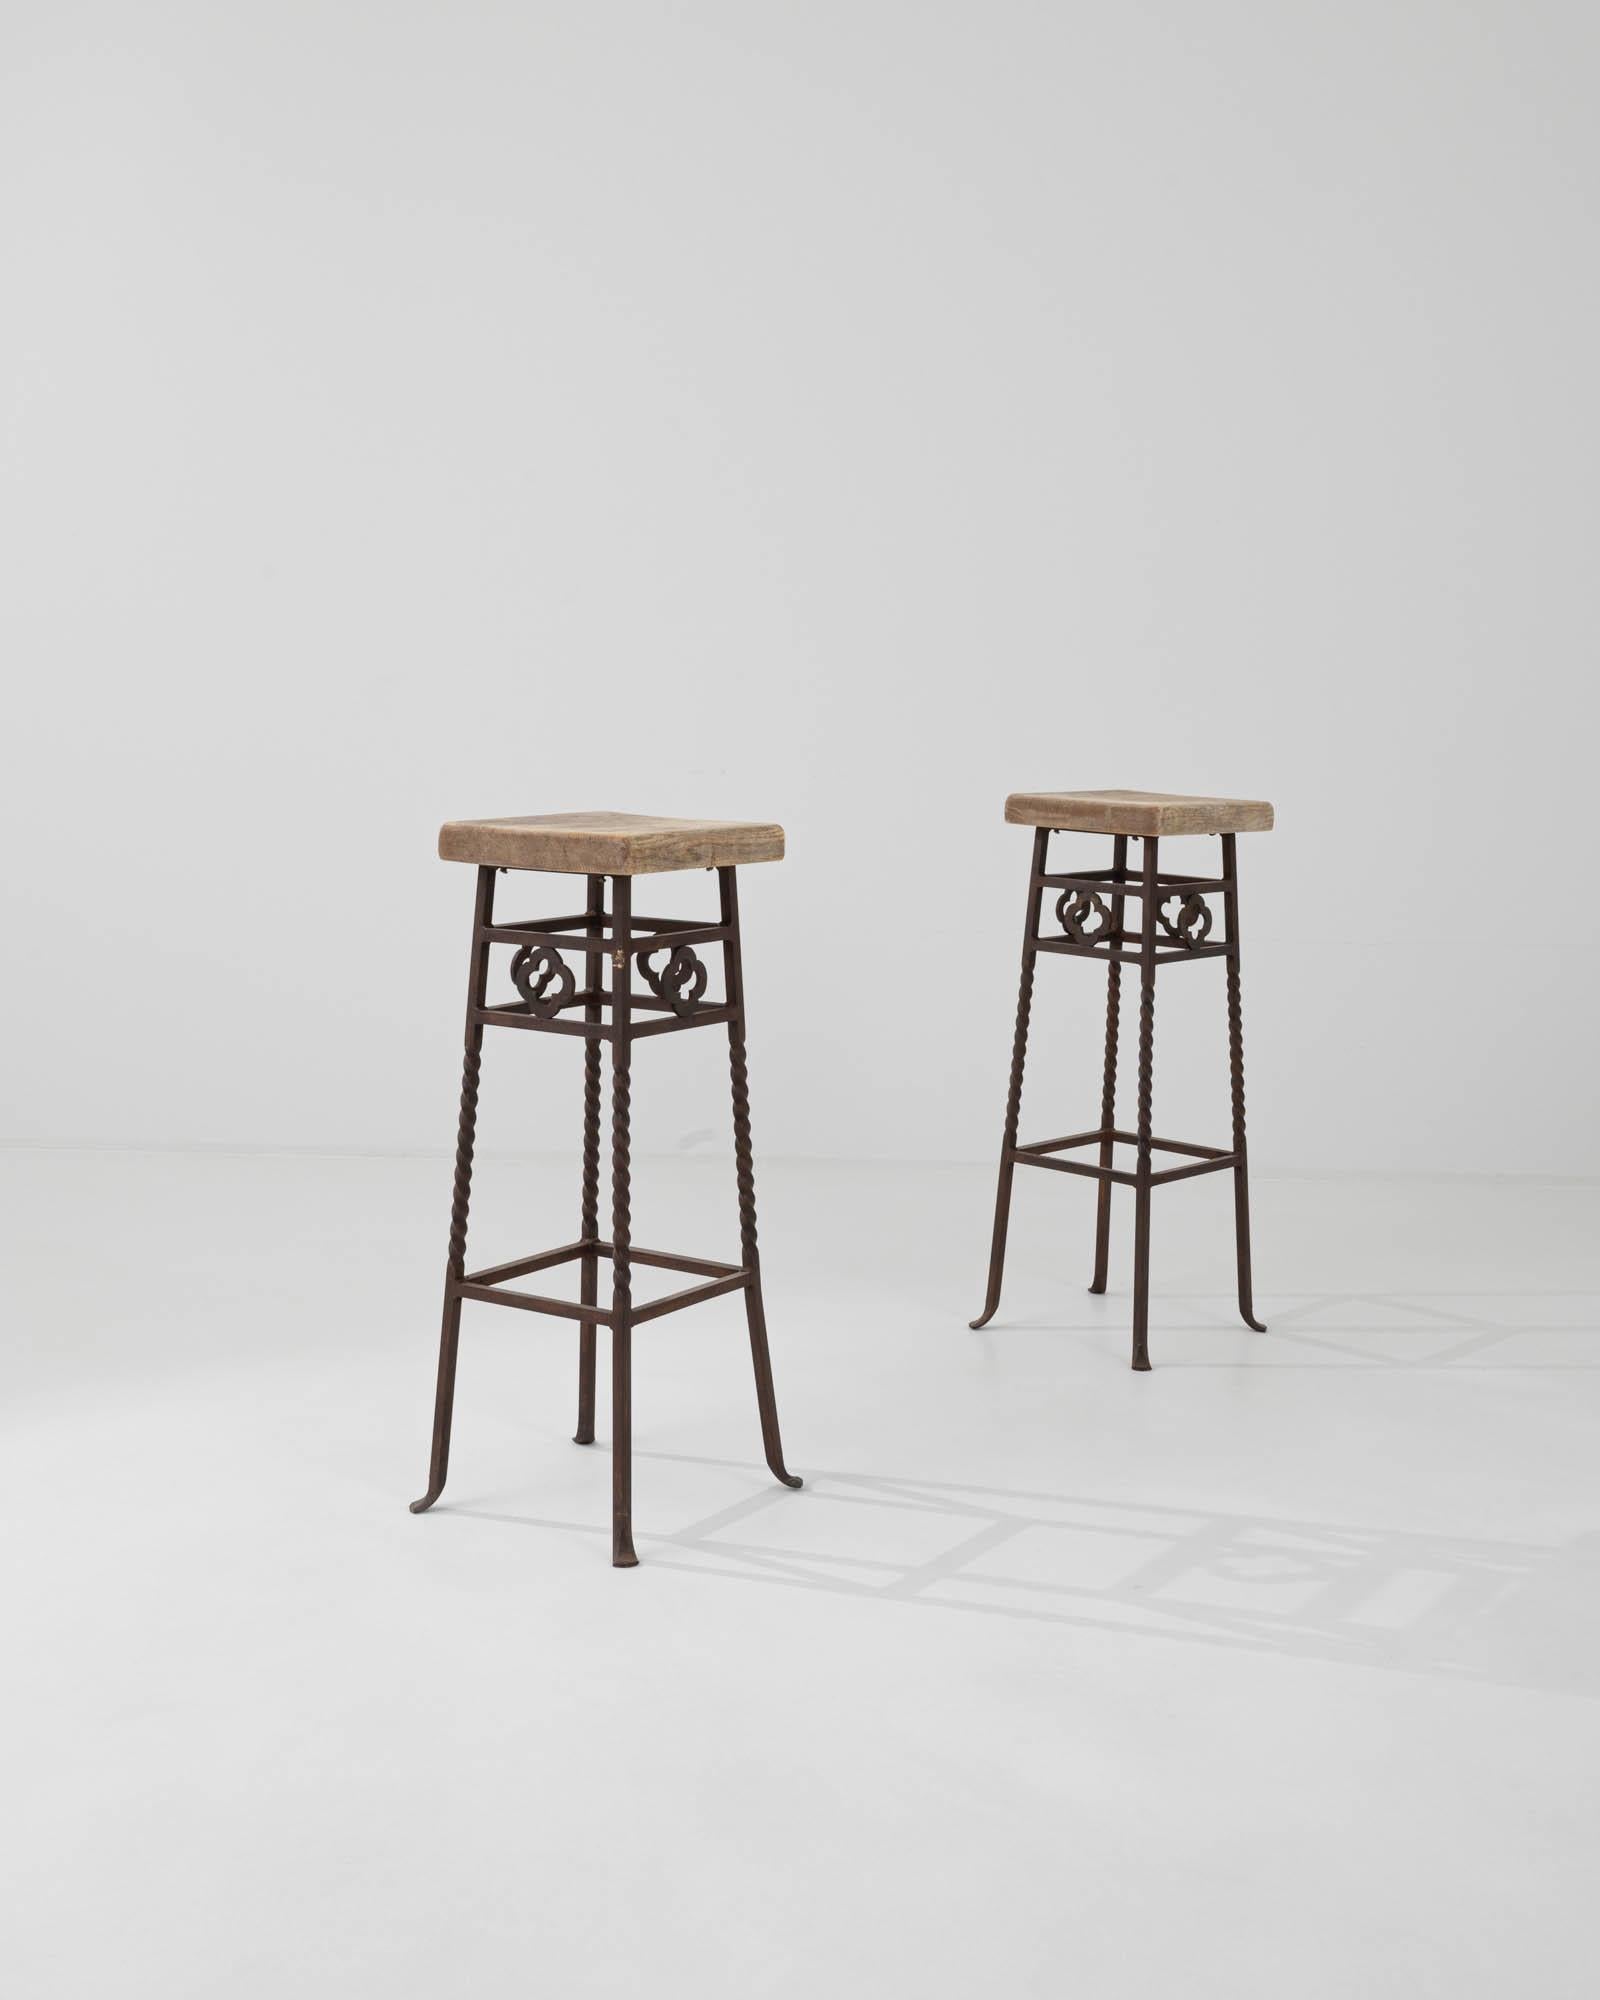 This pair of 20th-century French stools harmoniously blends robust iron with the inviting warmth of wood. Square wooden seats are elevated on a tall iron base that flaunt wrought twists and rosettes, terminating in coquettishly curved feet. The